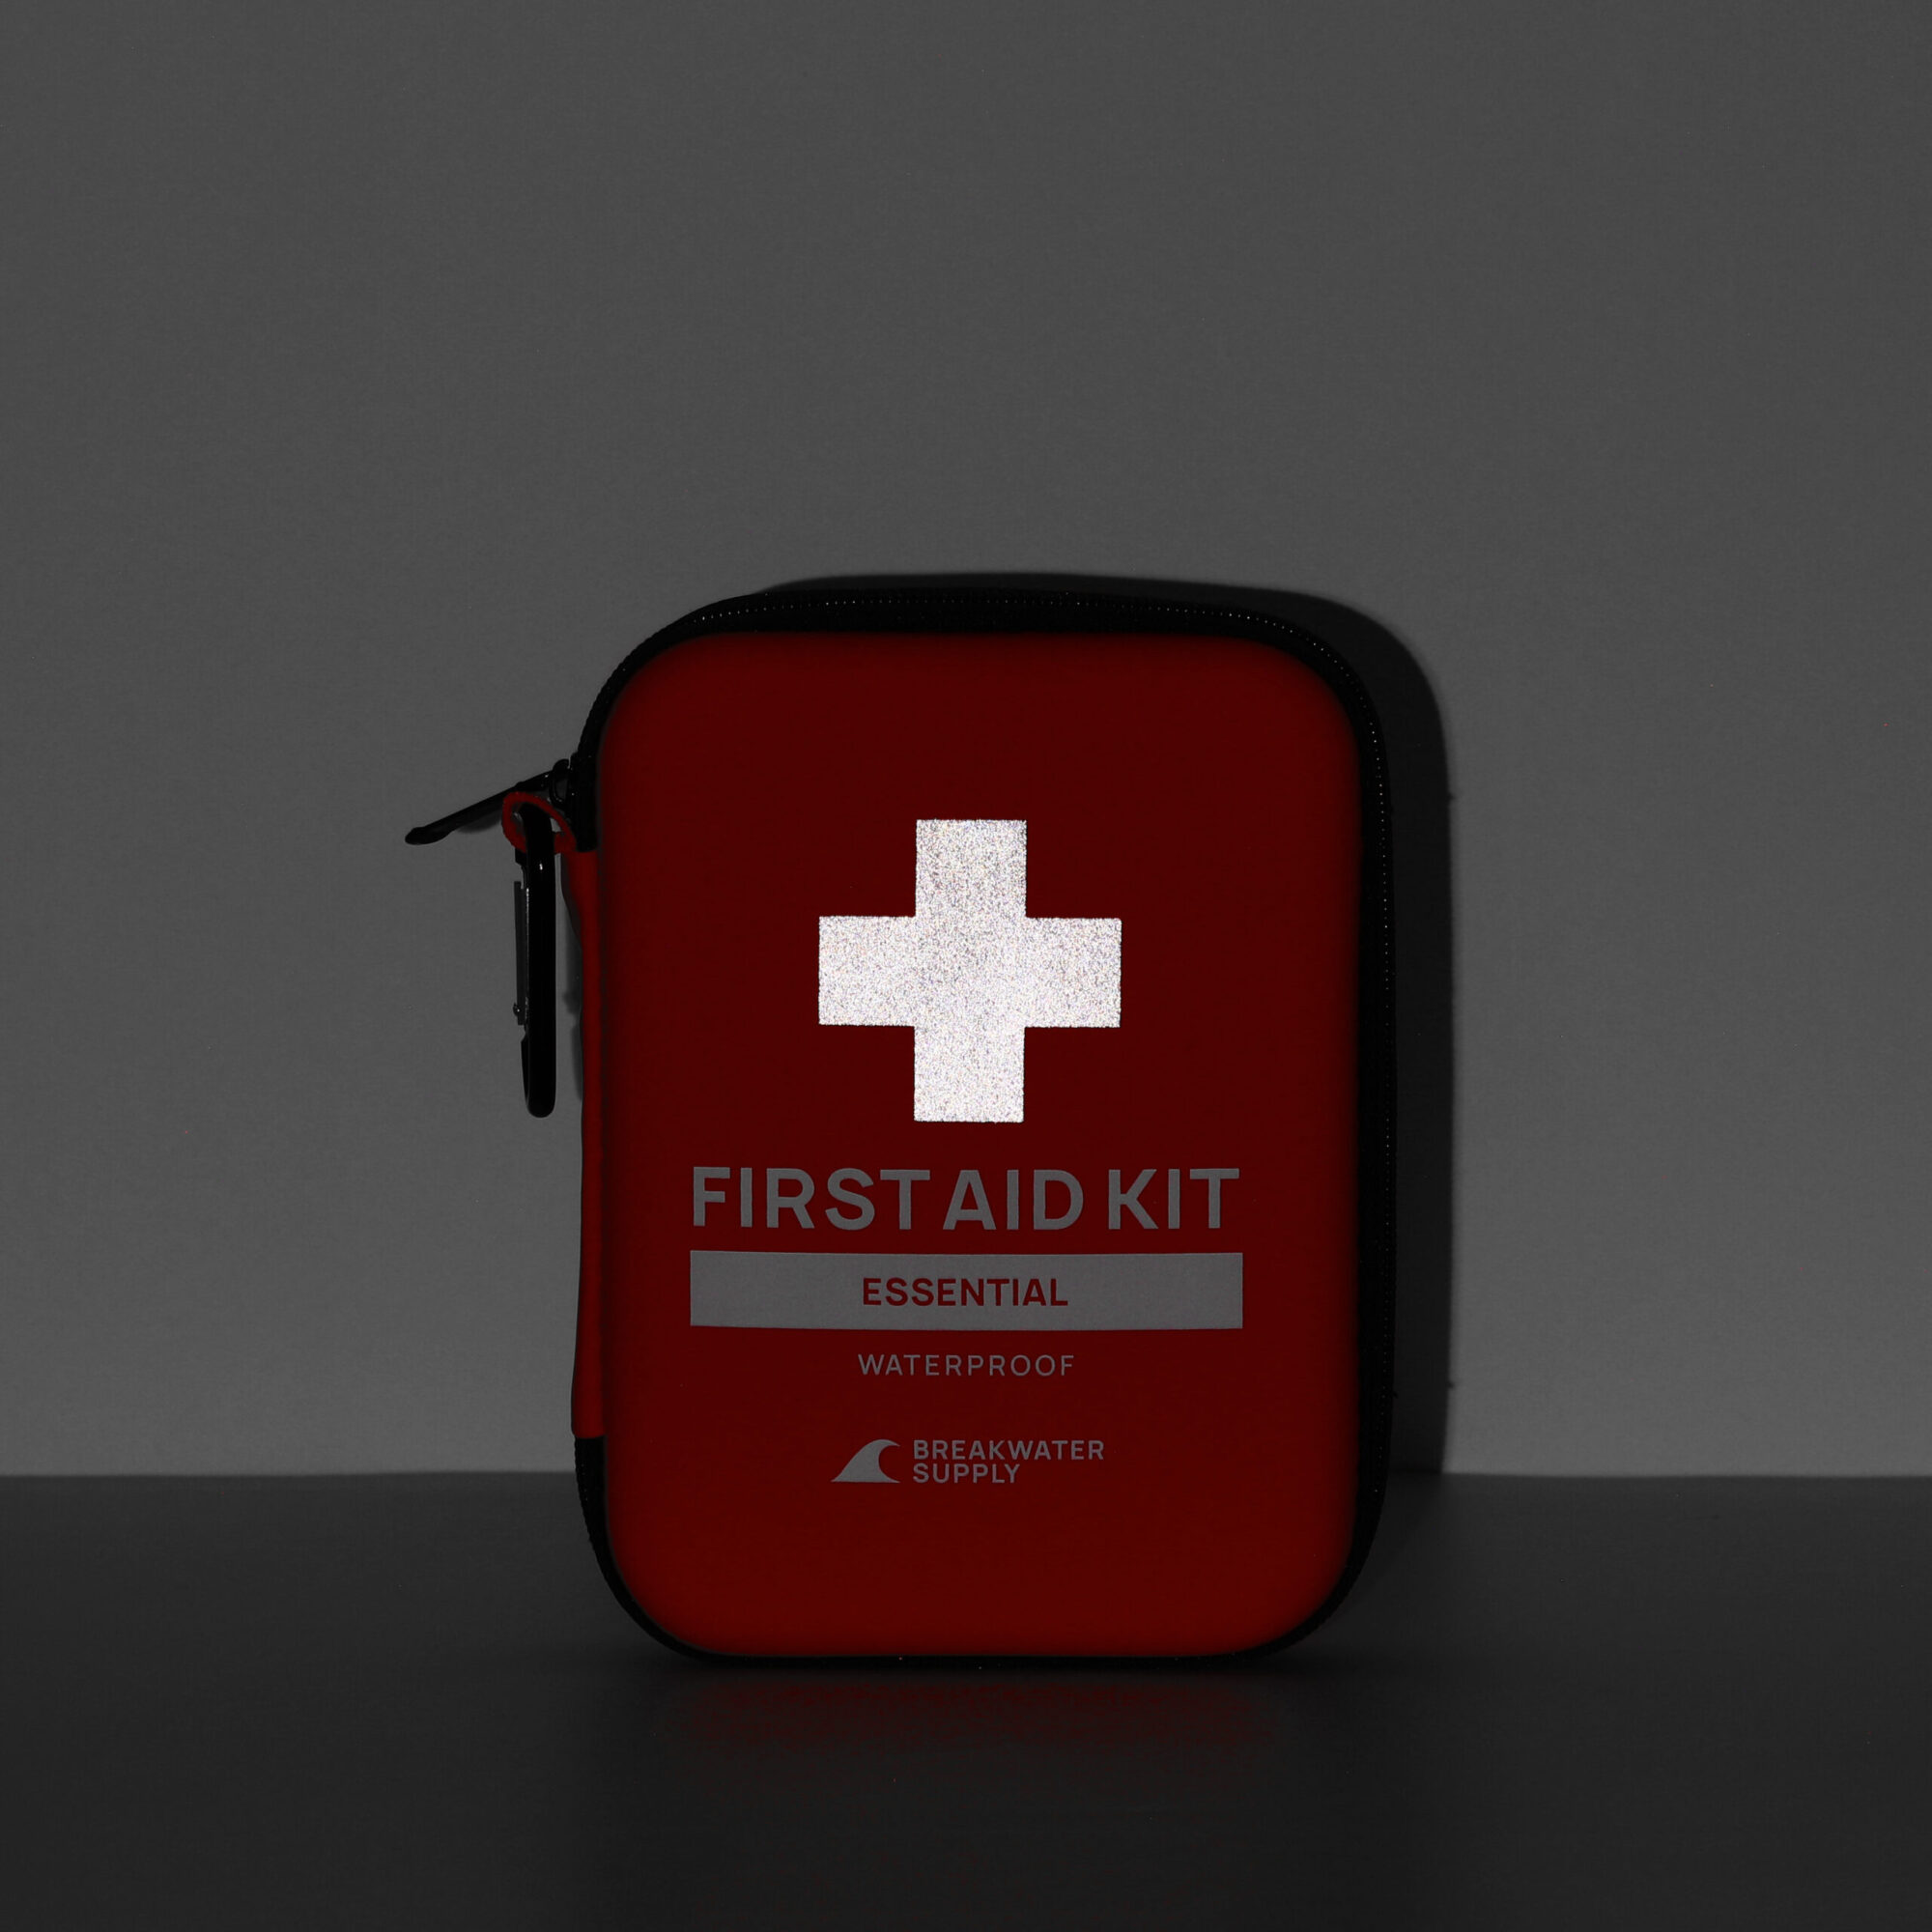 breakwater supply essential first aid kit